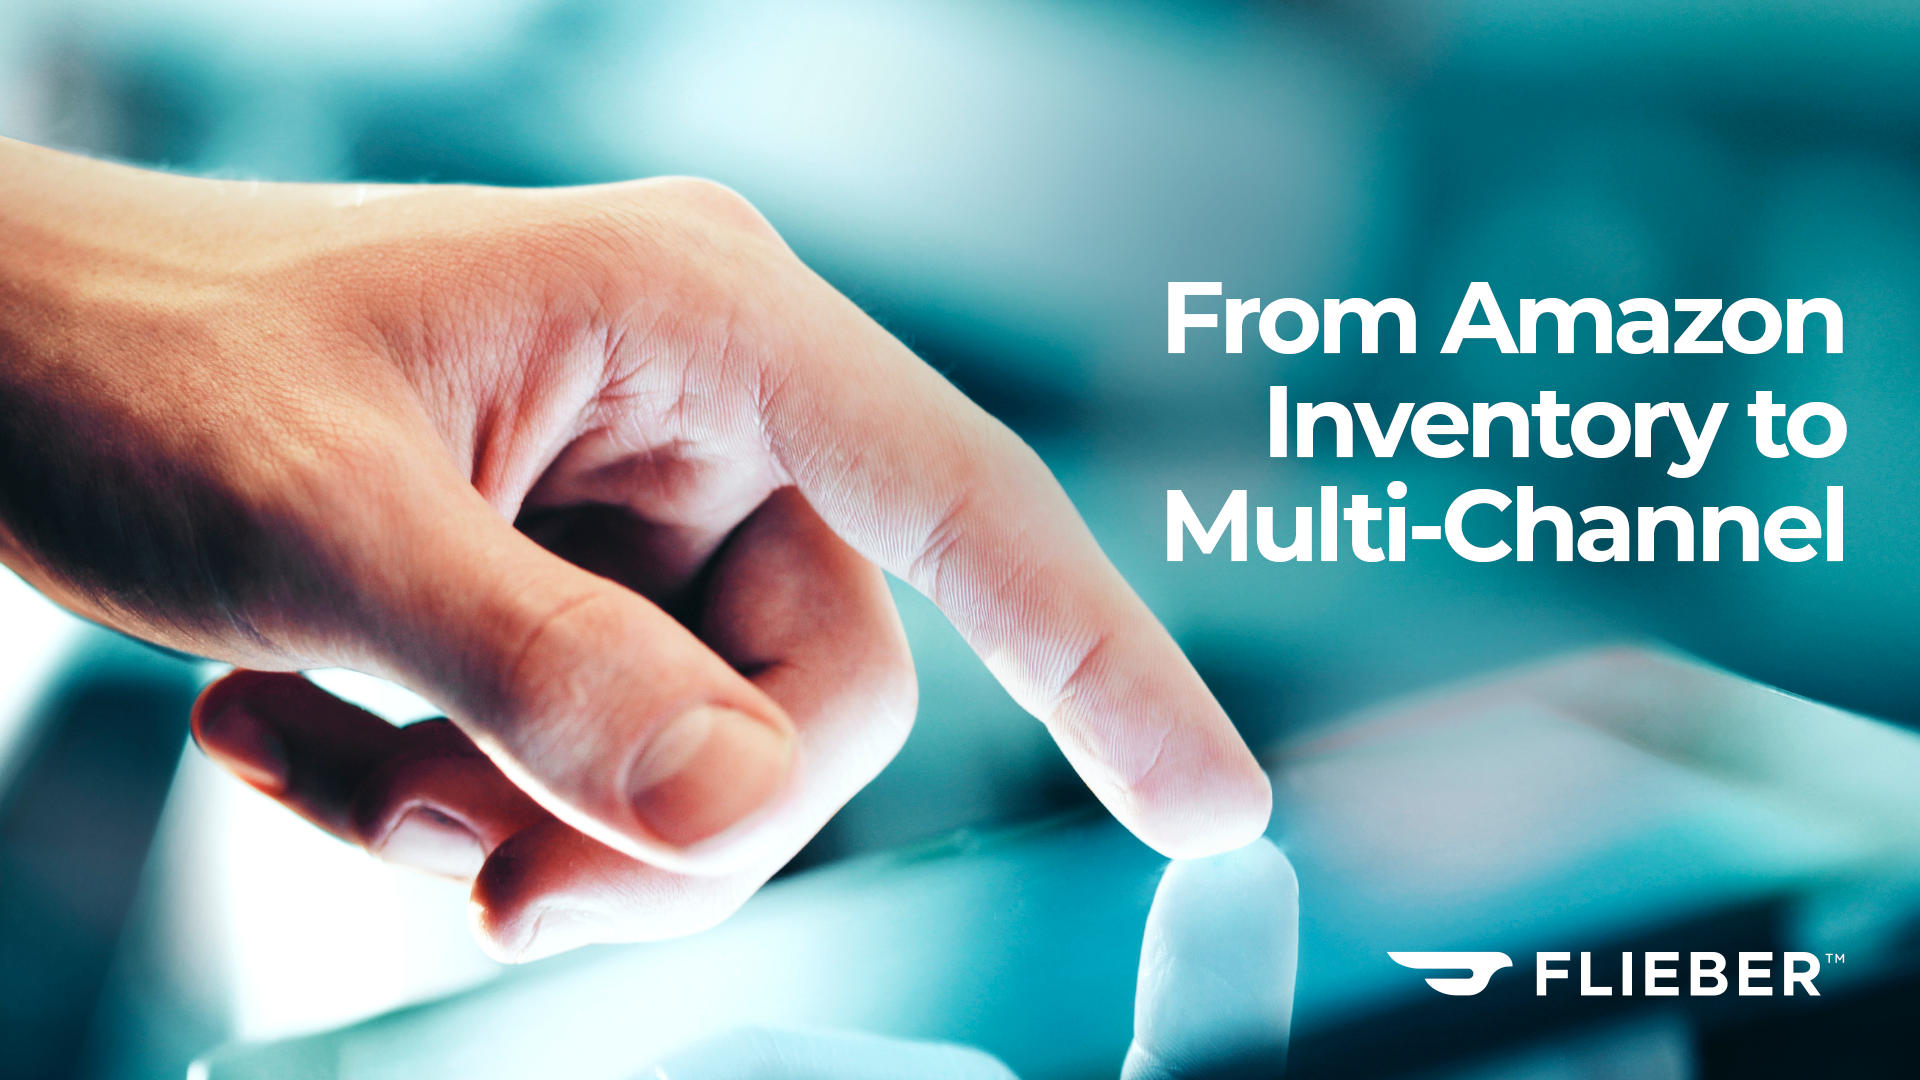 From Amazon Inventory to Multi-Channel: How to Solve Increasingly Complex Ecommerce Supply Chain Problems